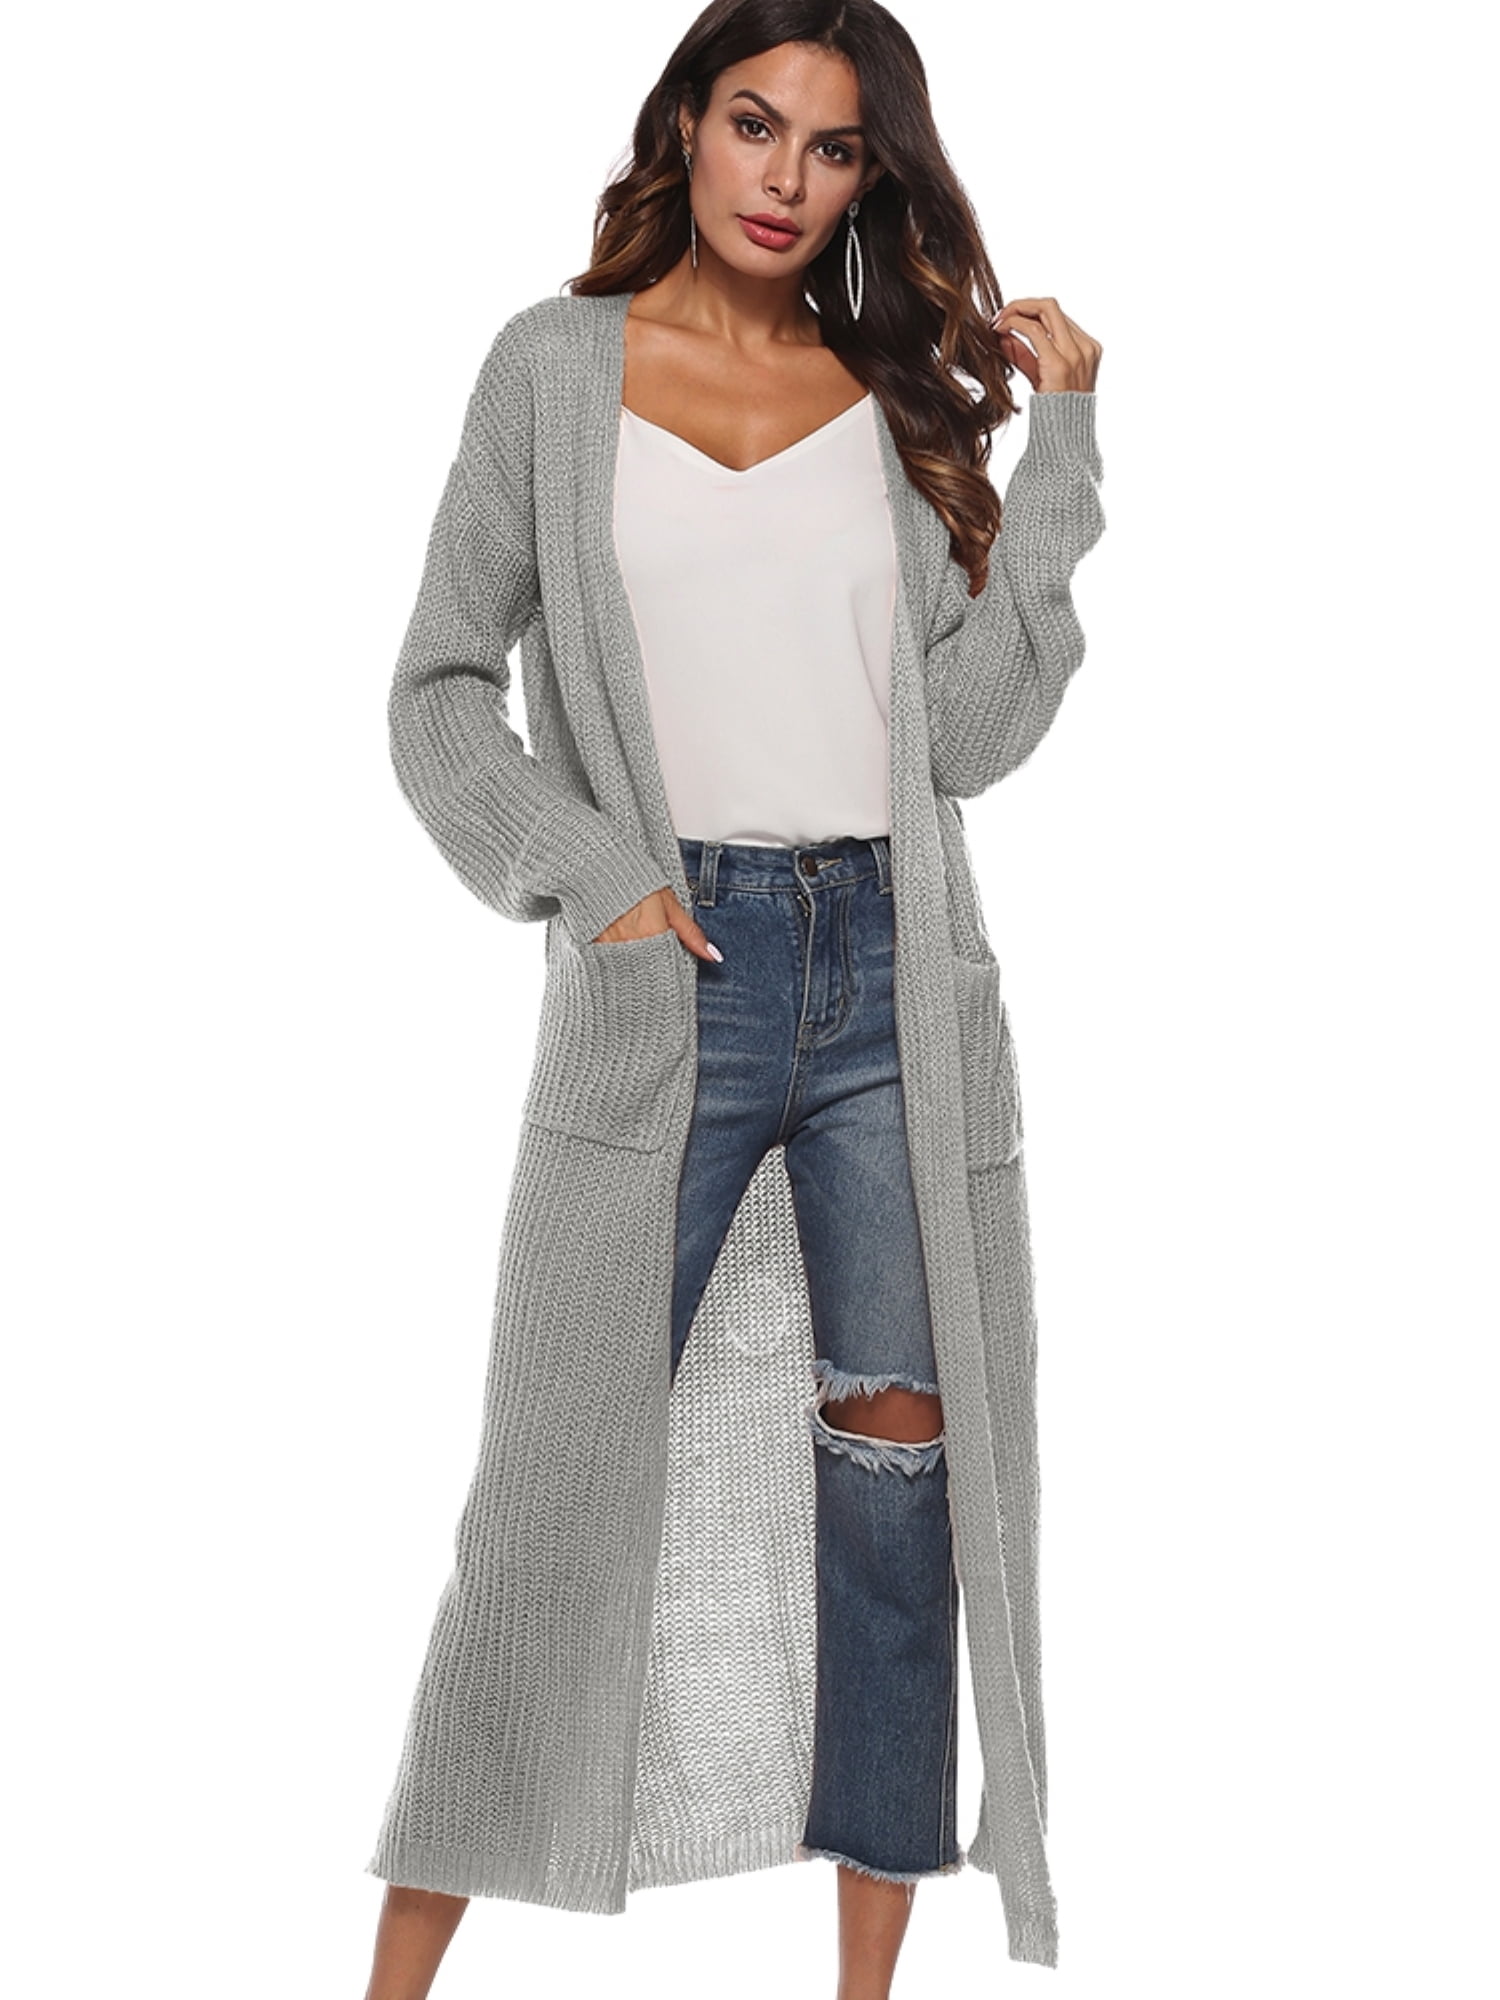 ASOS TALL Longline Heavyweight Knitted Duster Cardigan in Oatmeal